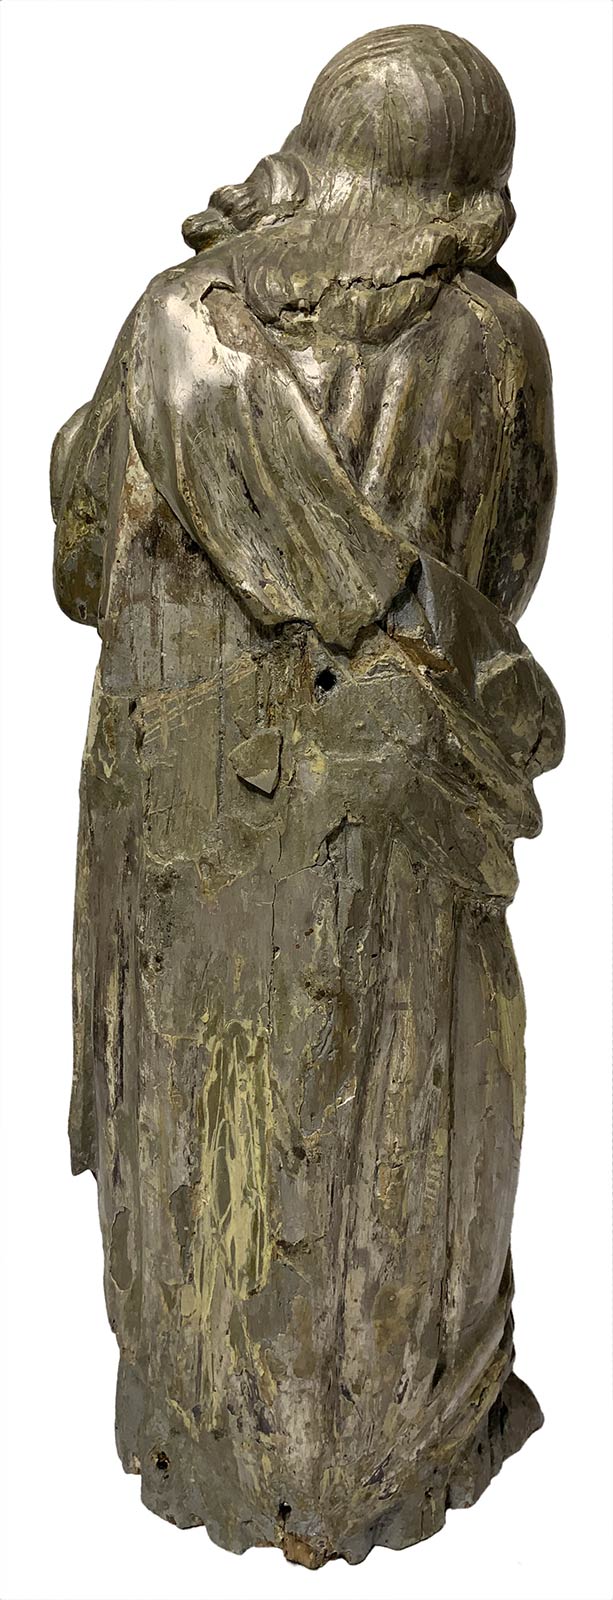 Wooden statue depicting a young St. Agatha, the seventeenth century, worked with silver leaf. H cm - Image 3 of 4